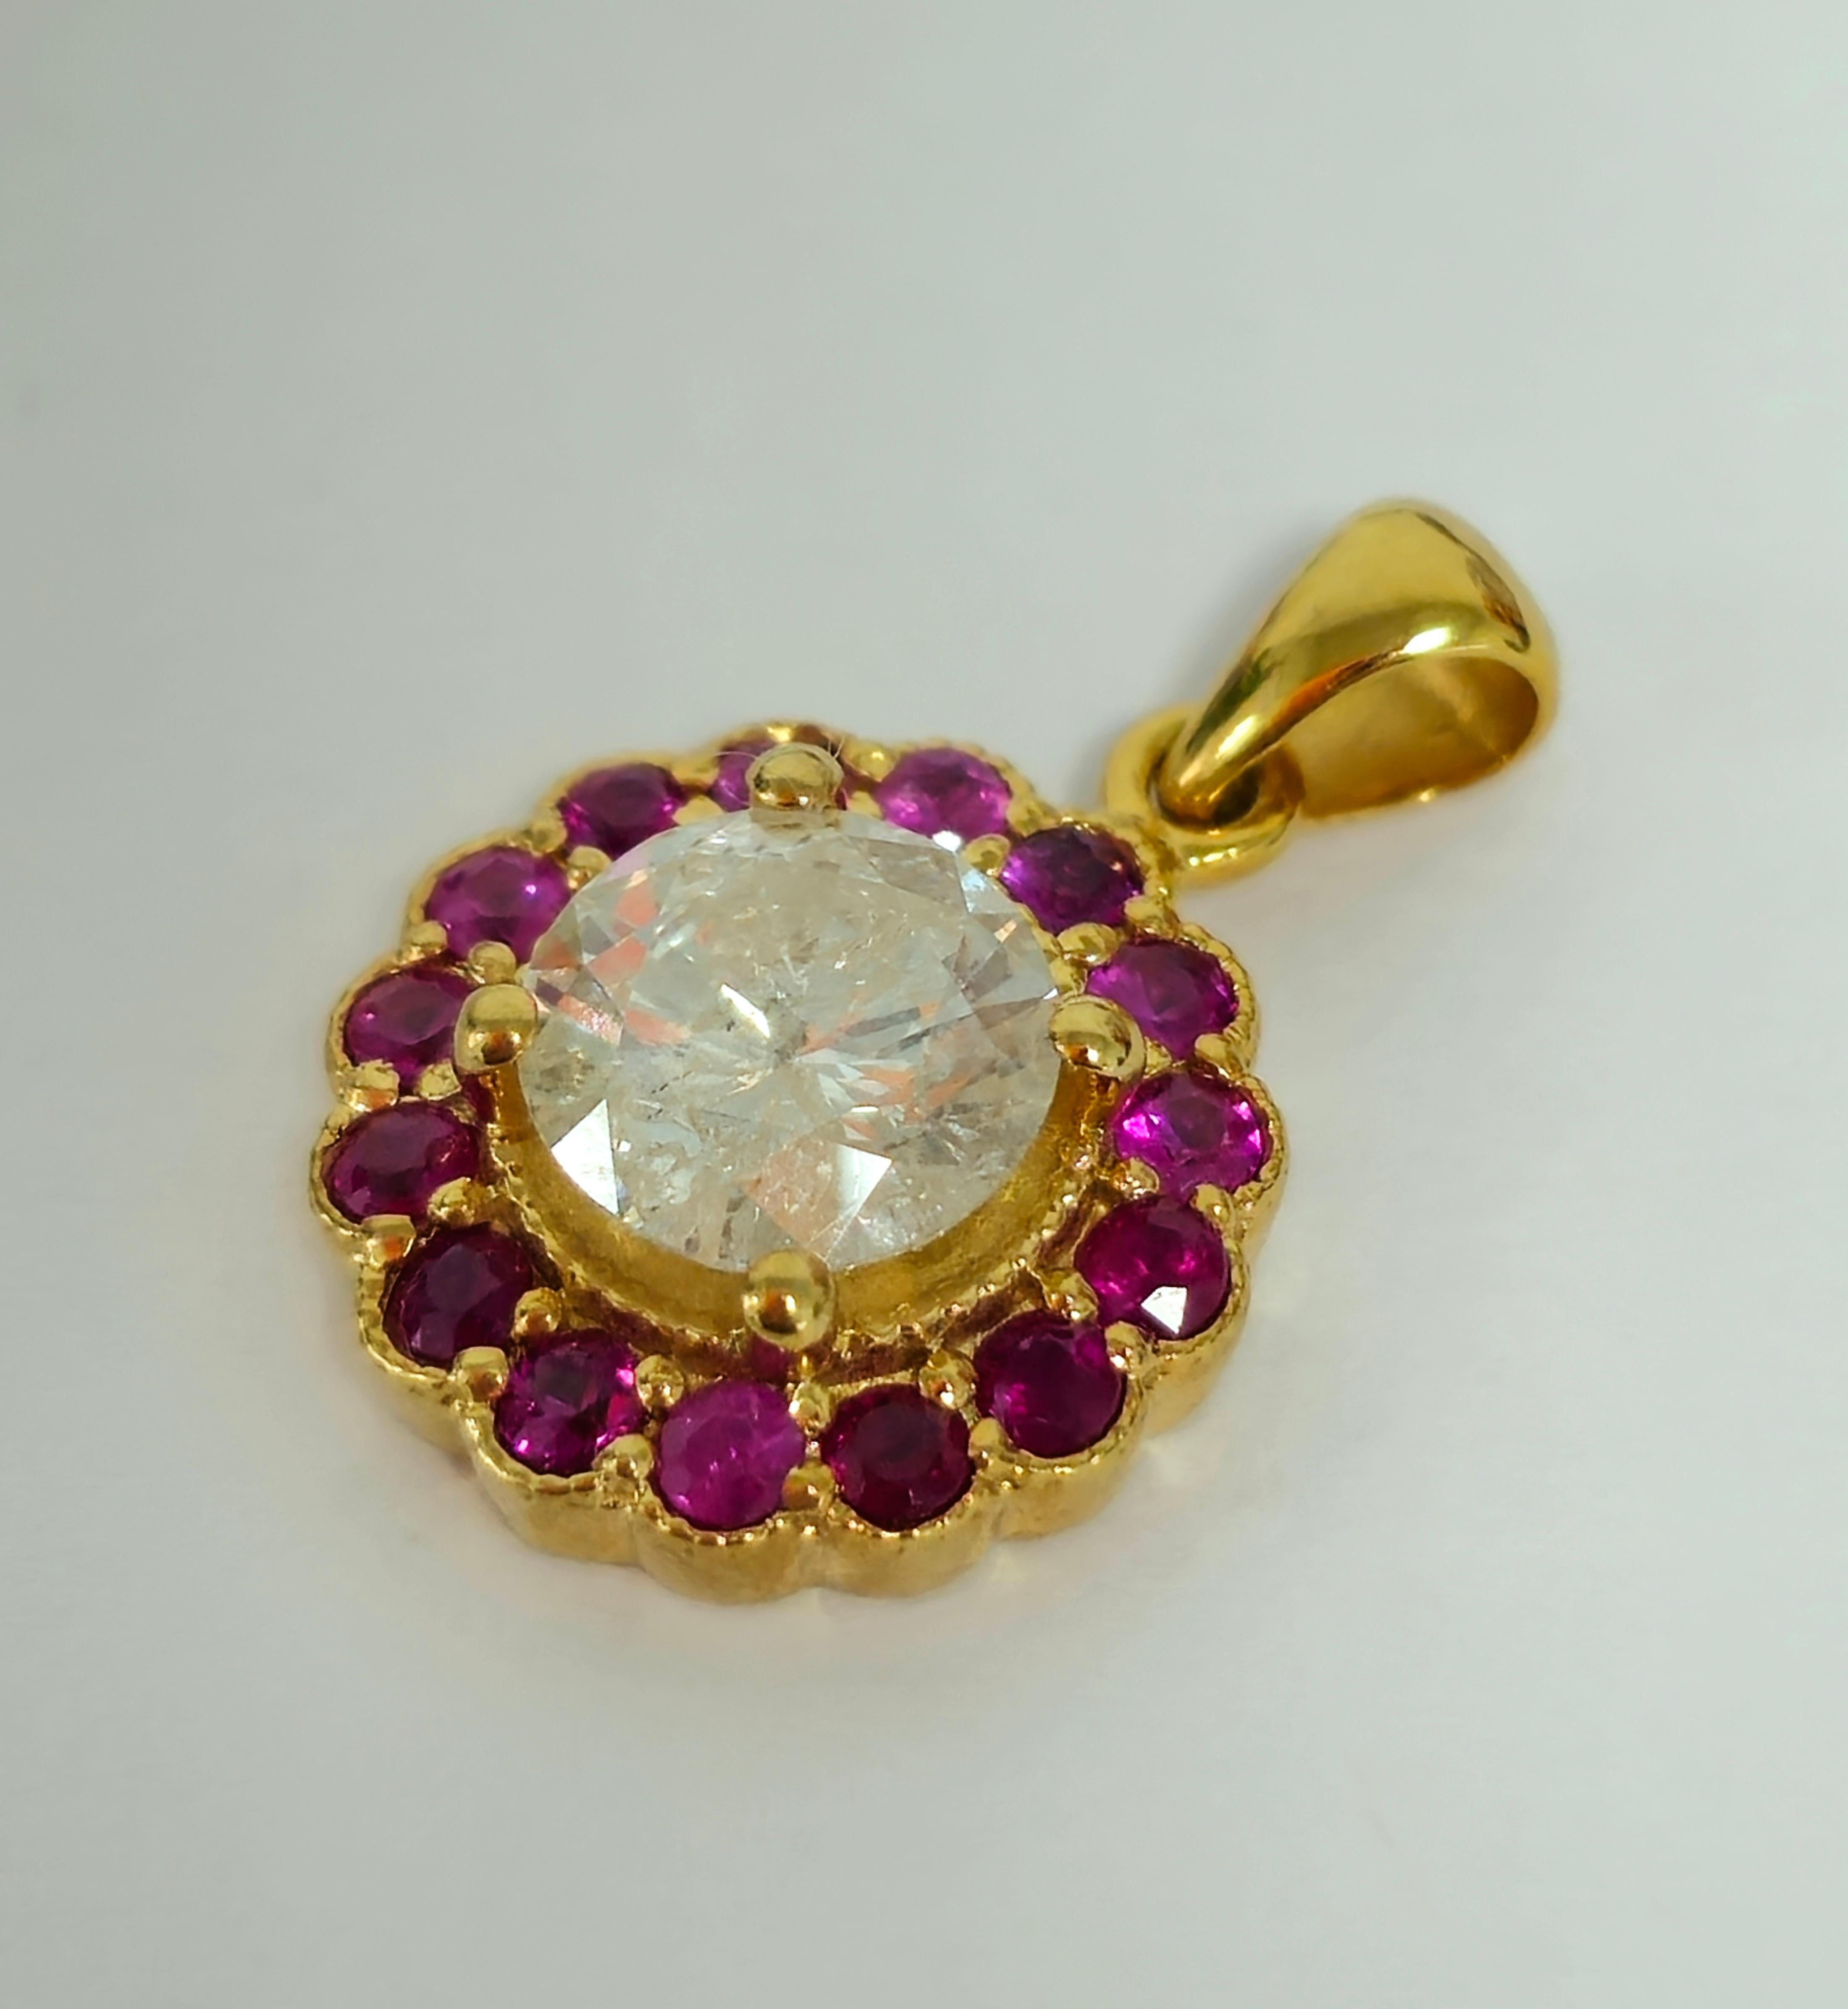 Adorn yourself with sophistication with this 14K yellow gold ring, featuring a striking 1.51 carat natural diamond at its center, complemented by 0.60 carats of natural Burma rubies on the sides, resulting in a total carat weight of 2.11 carats.